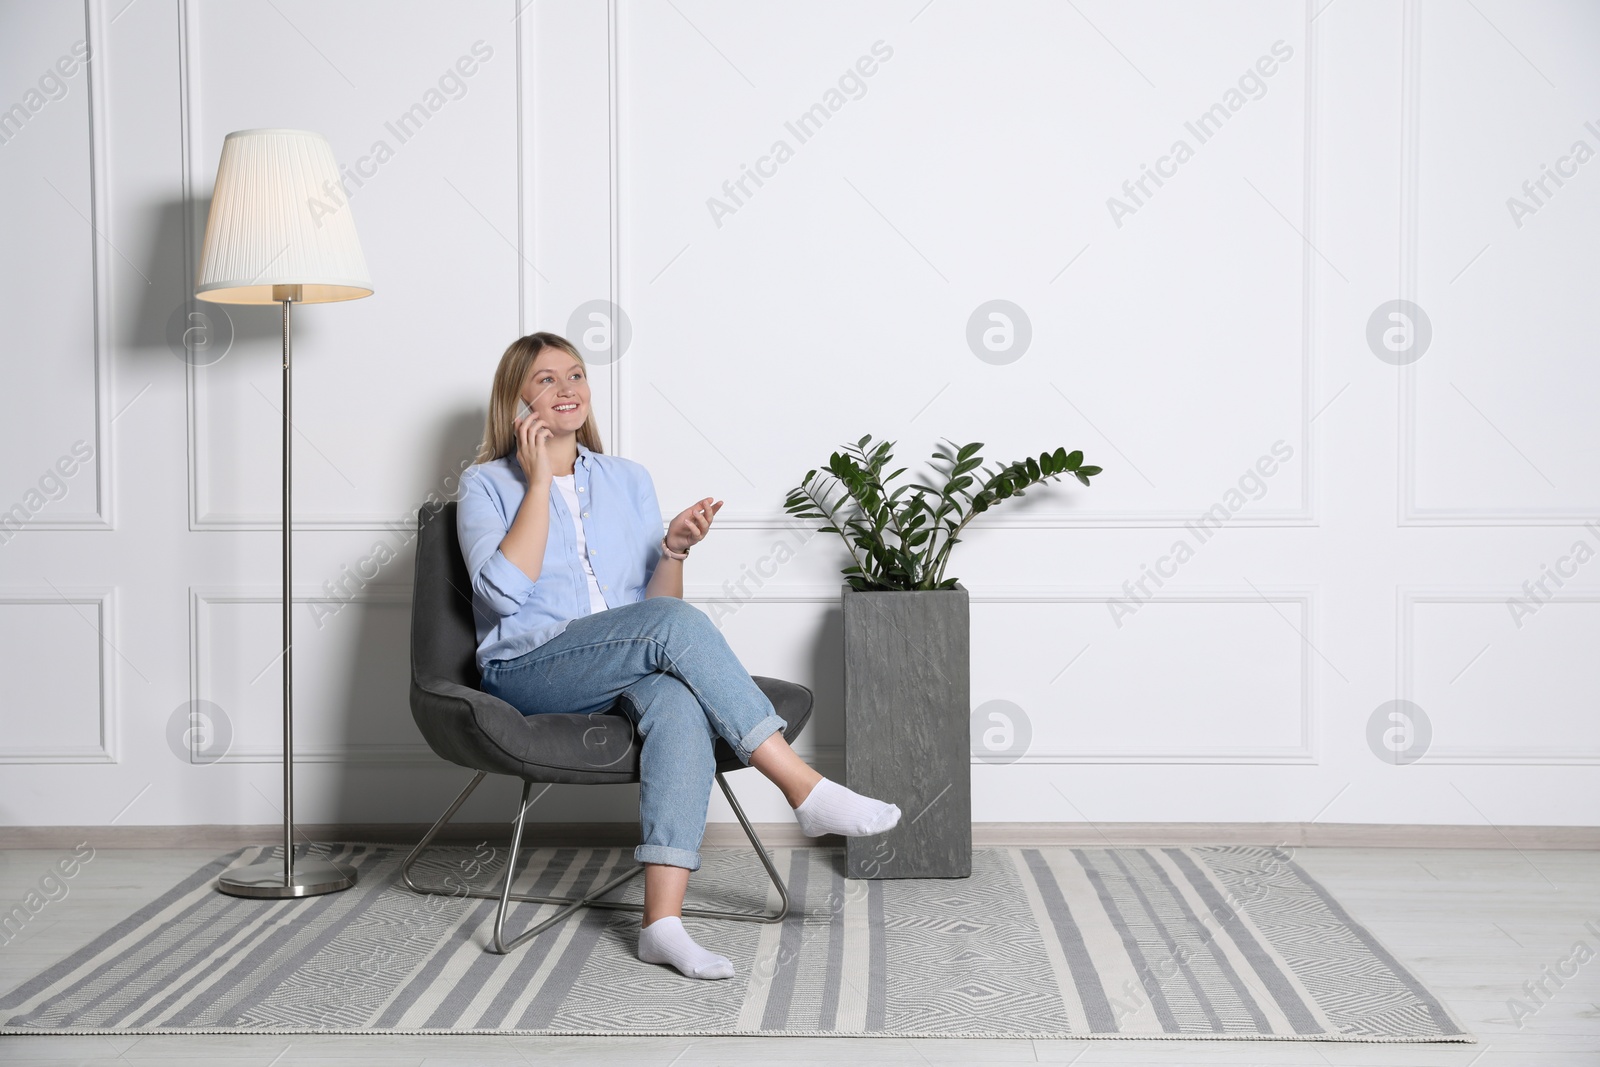 Photo of Young woman talking on phone in armchair at home, space for text. Interior design